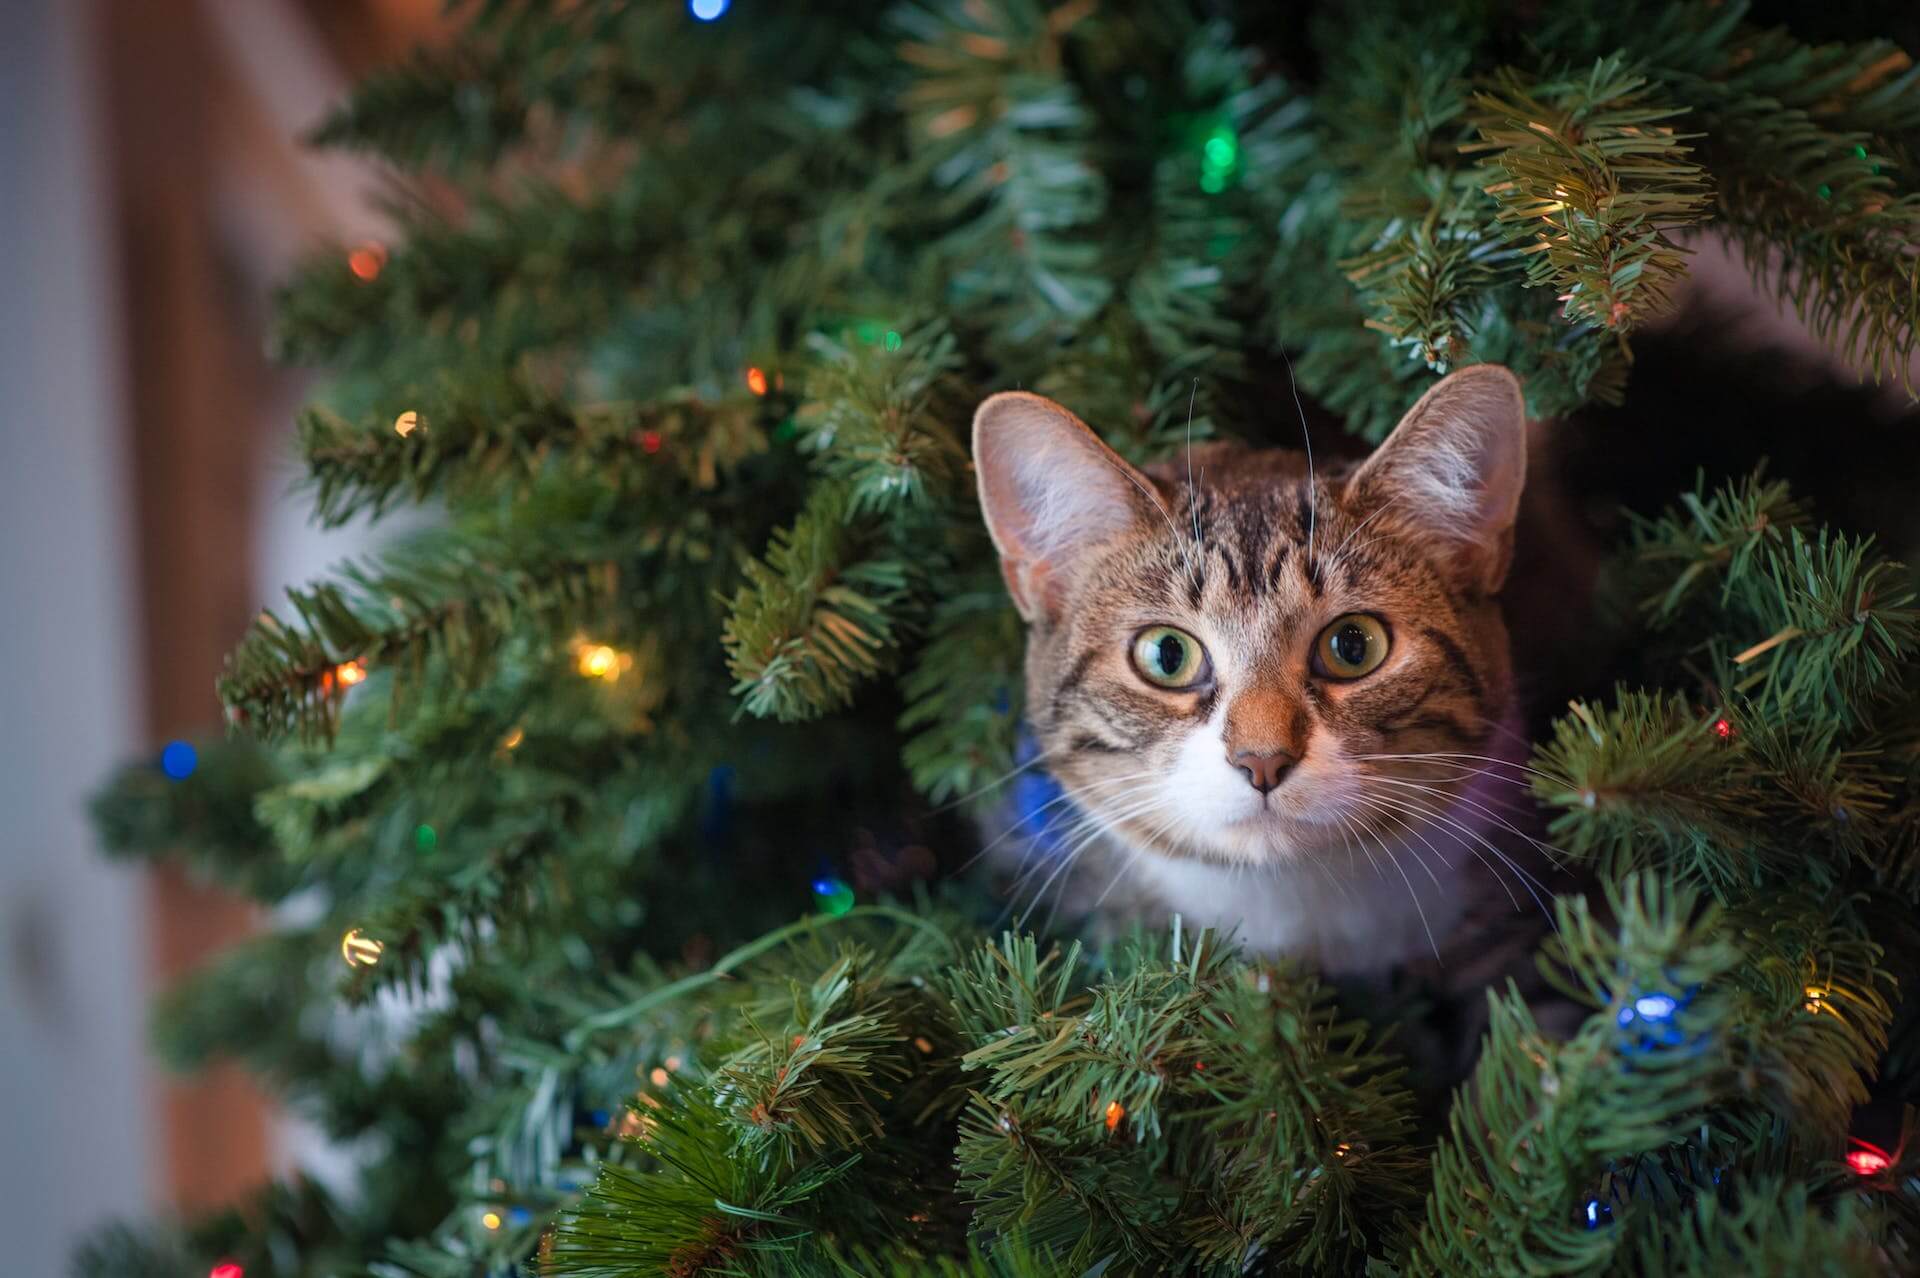 A cat poking their head out from a Christmas tree